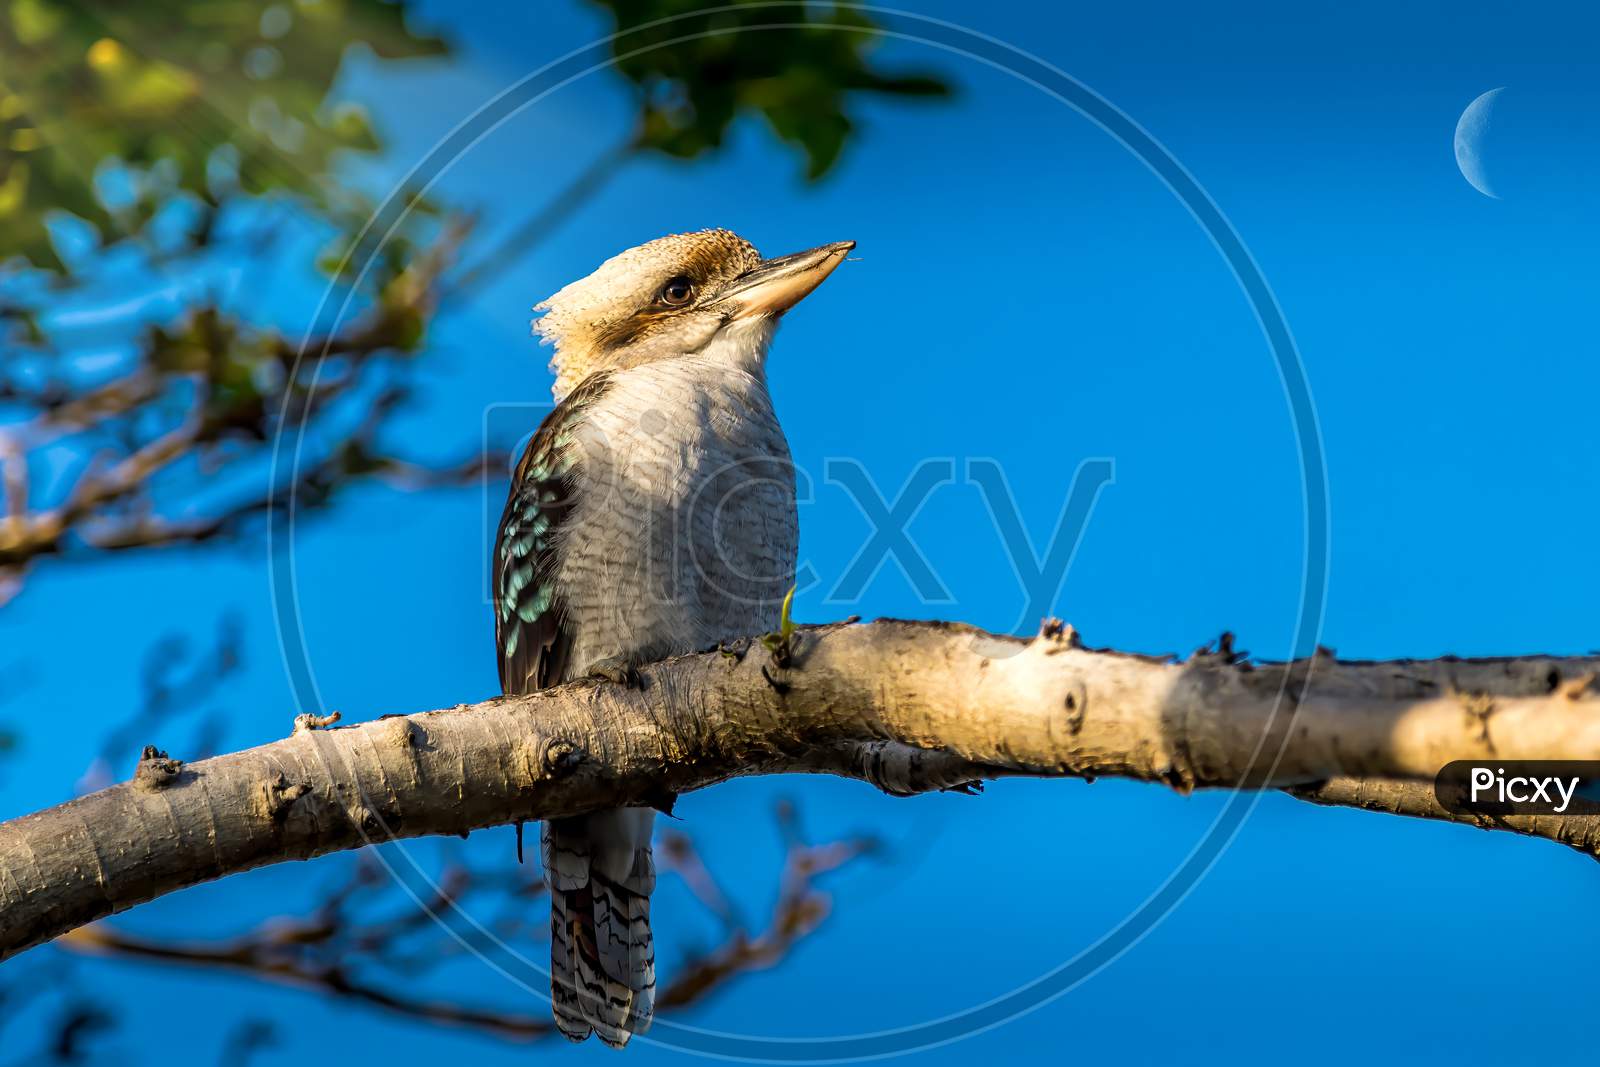 A kookaburra - one of the most popular birds of Australia - sitting on a branch of a tree in a public park in Sydney, New South Wales during a hot day in summer.